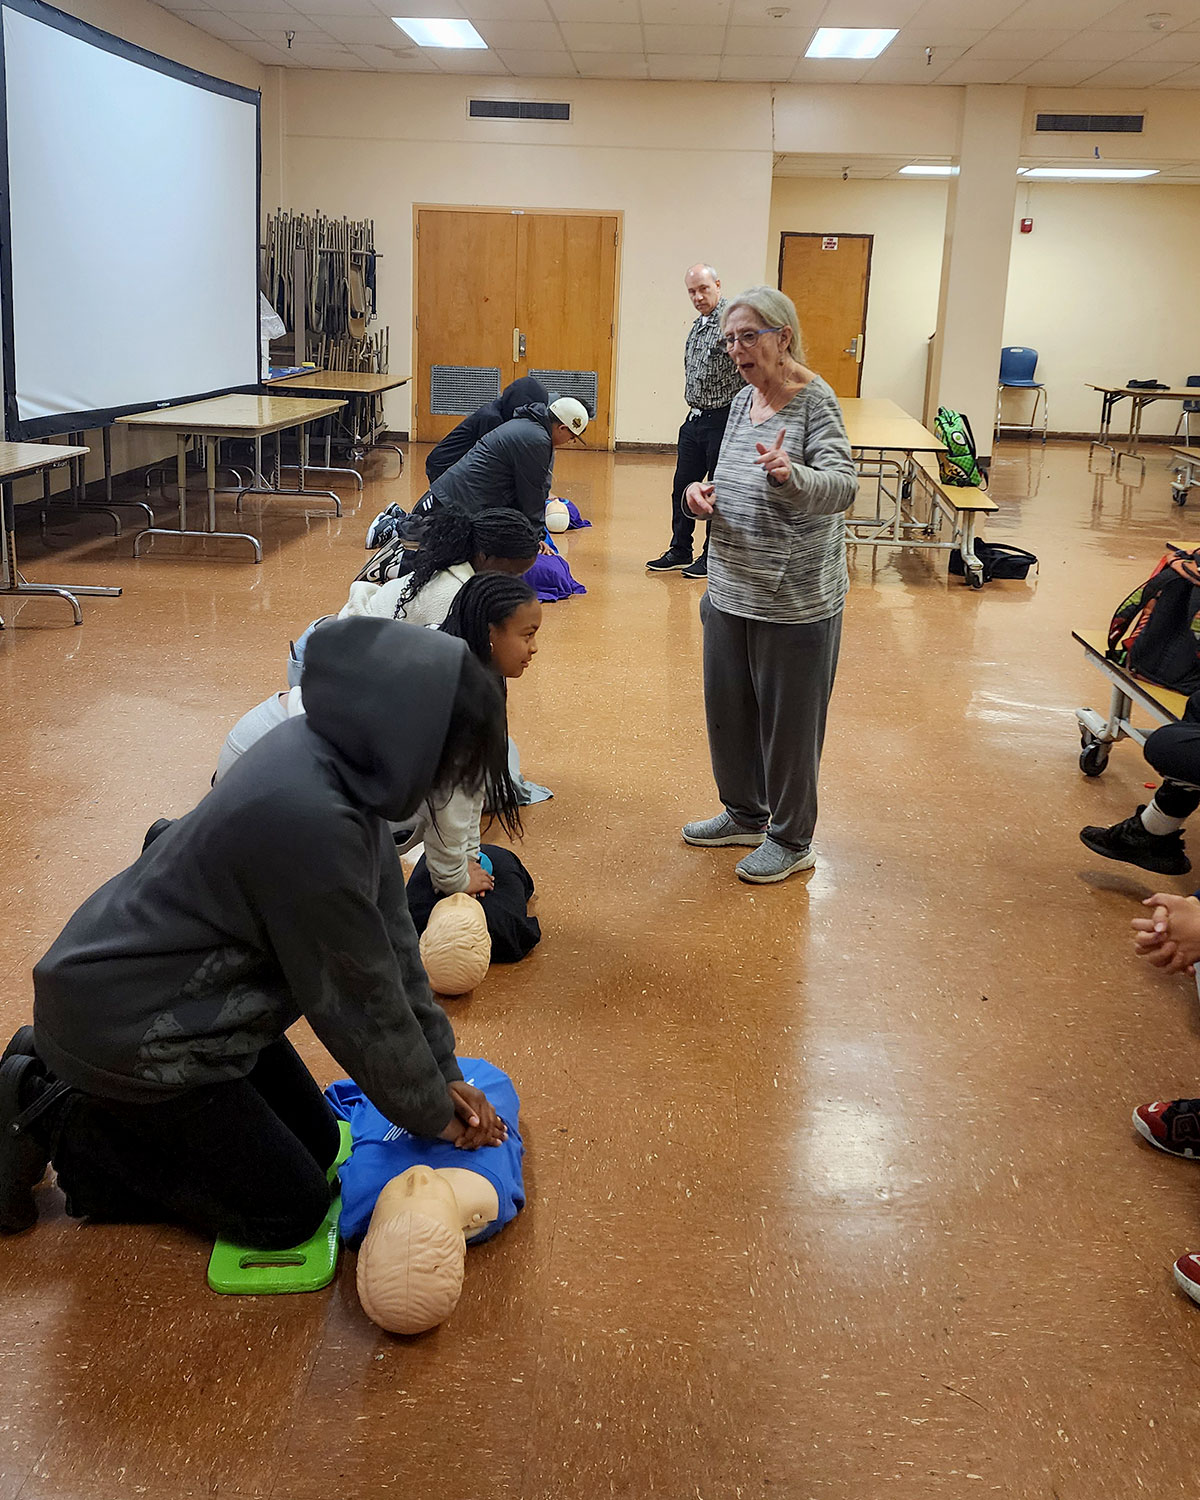 CPR training at Audubon MS in LA sponsored by Bessie Morris Foundation